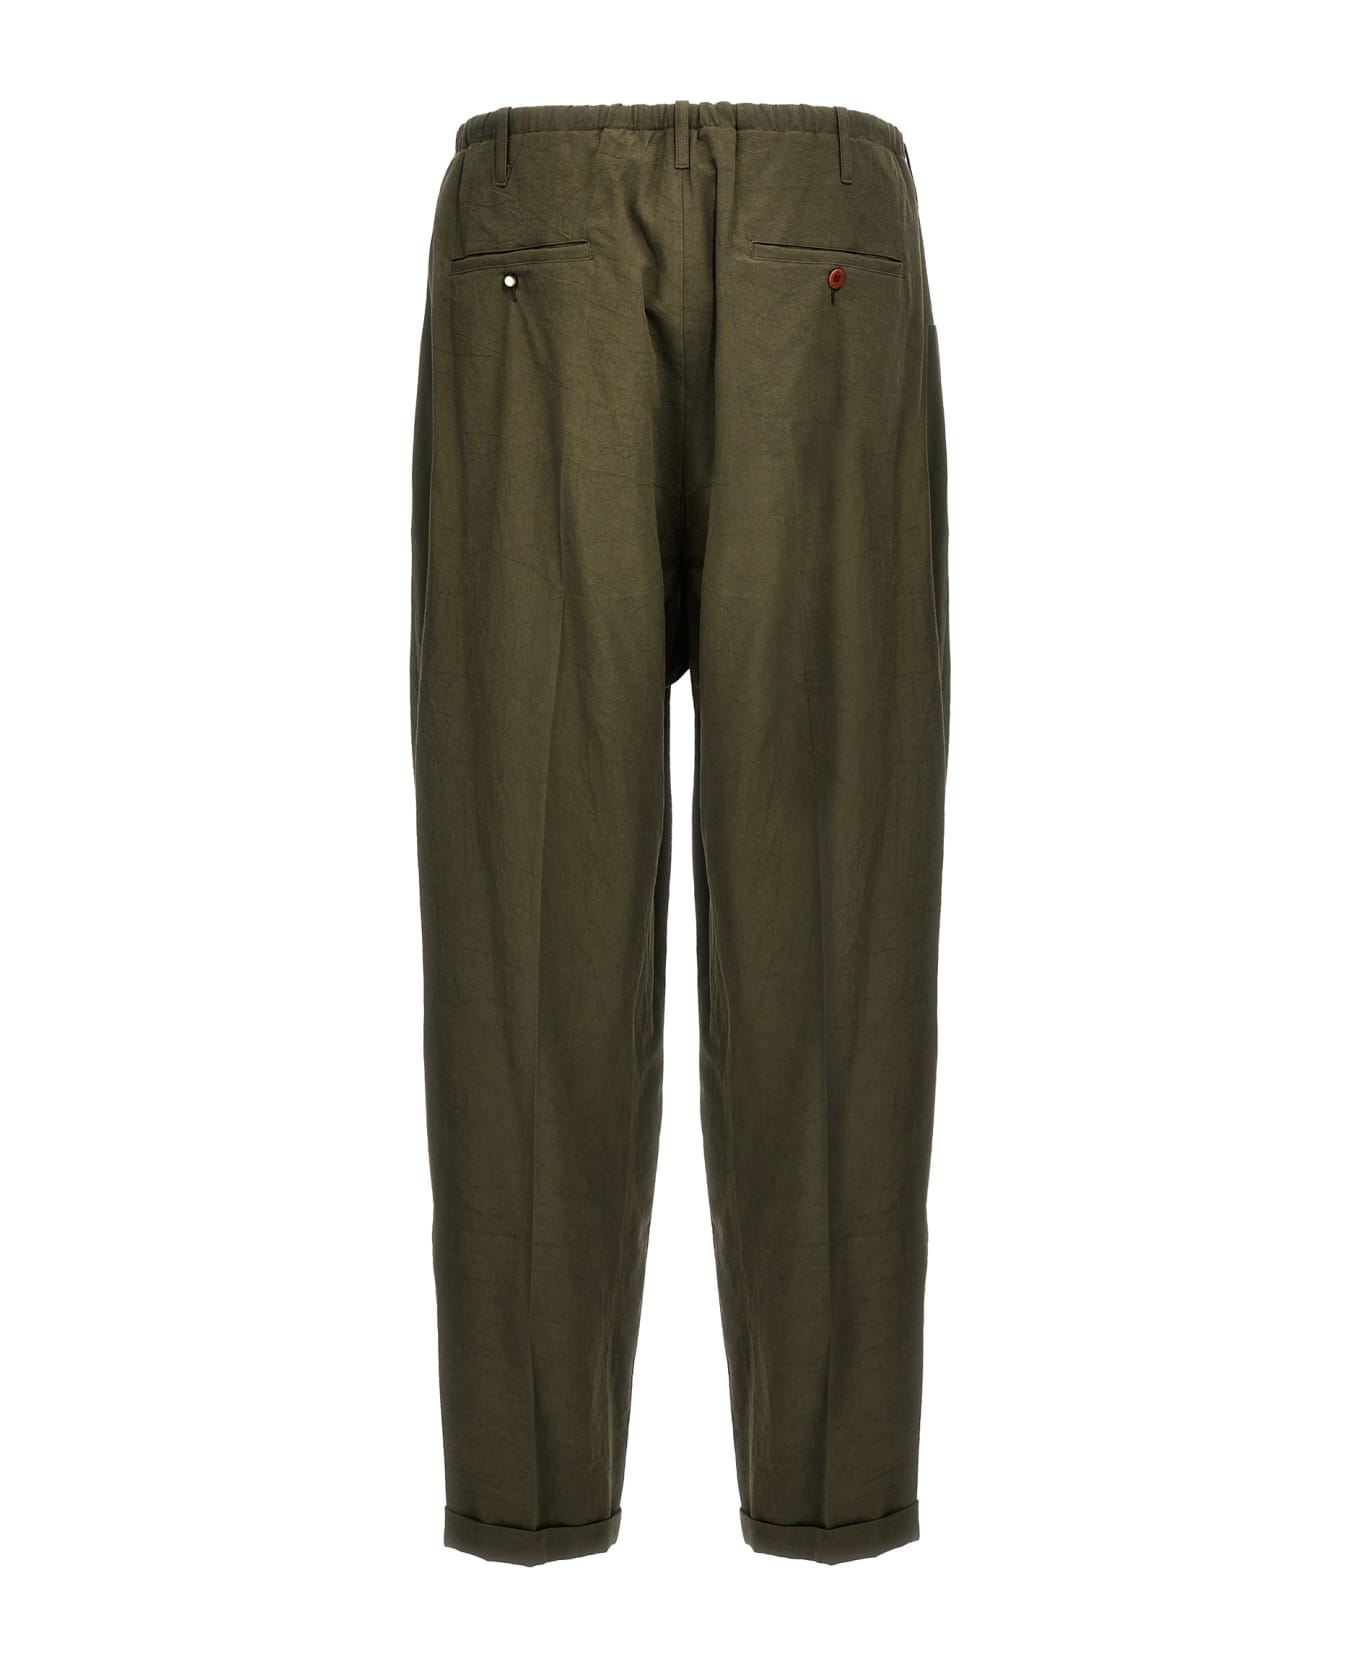 Magliano 'new People's' Pants - BROWN ボトムス